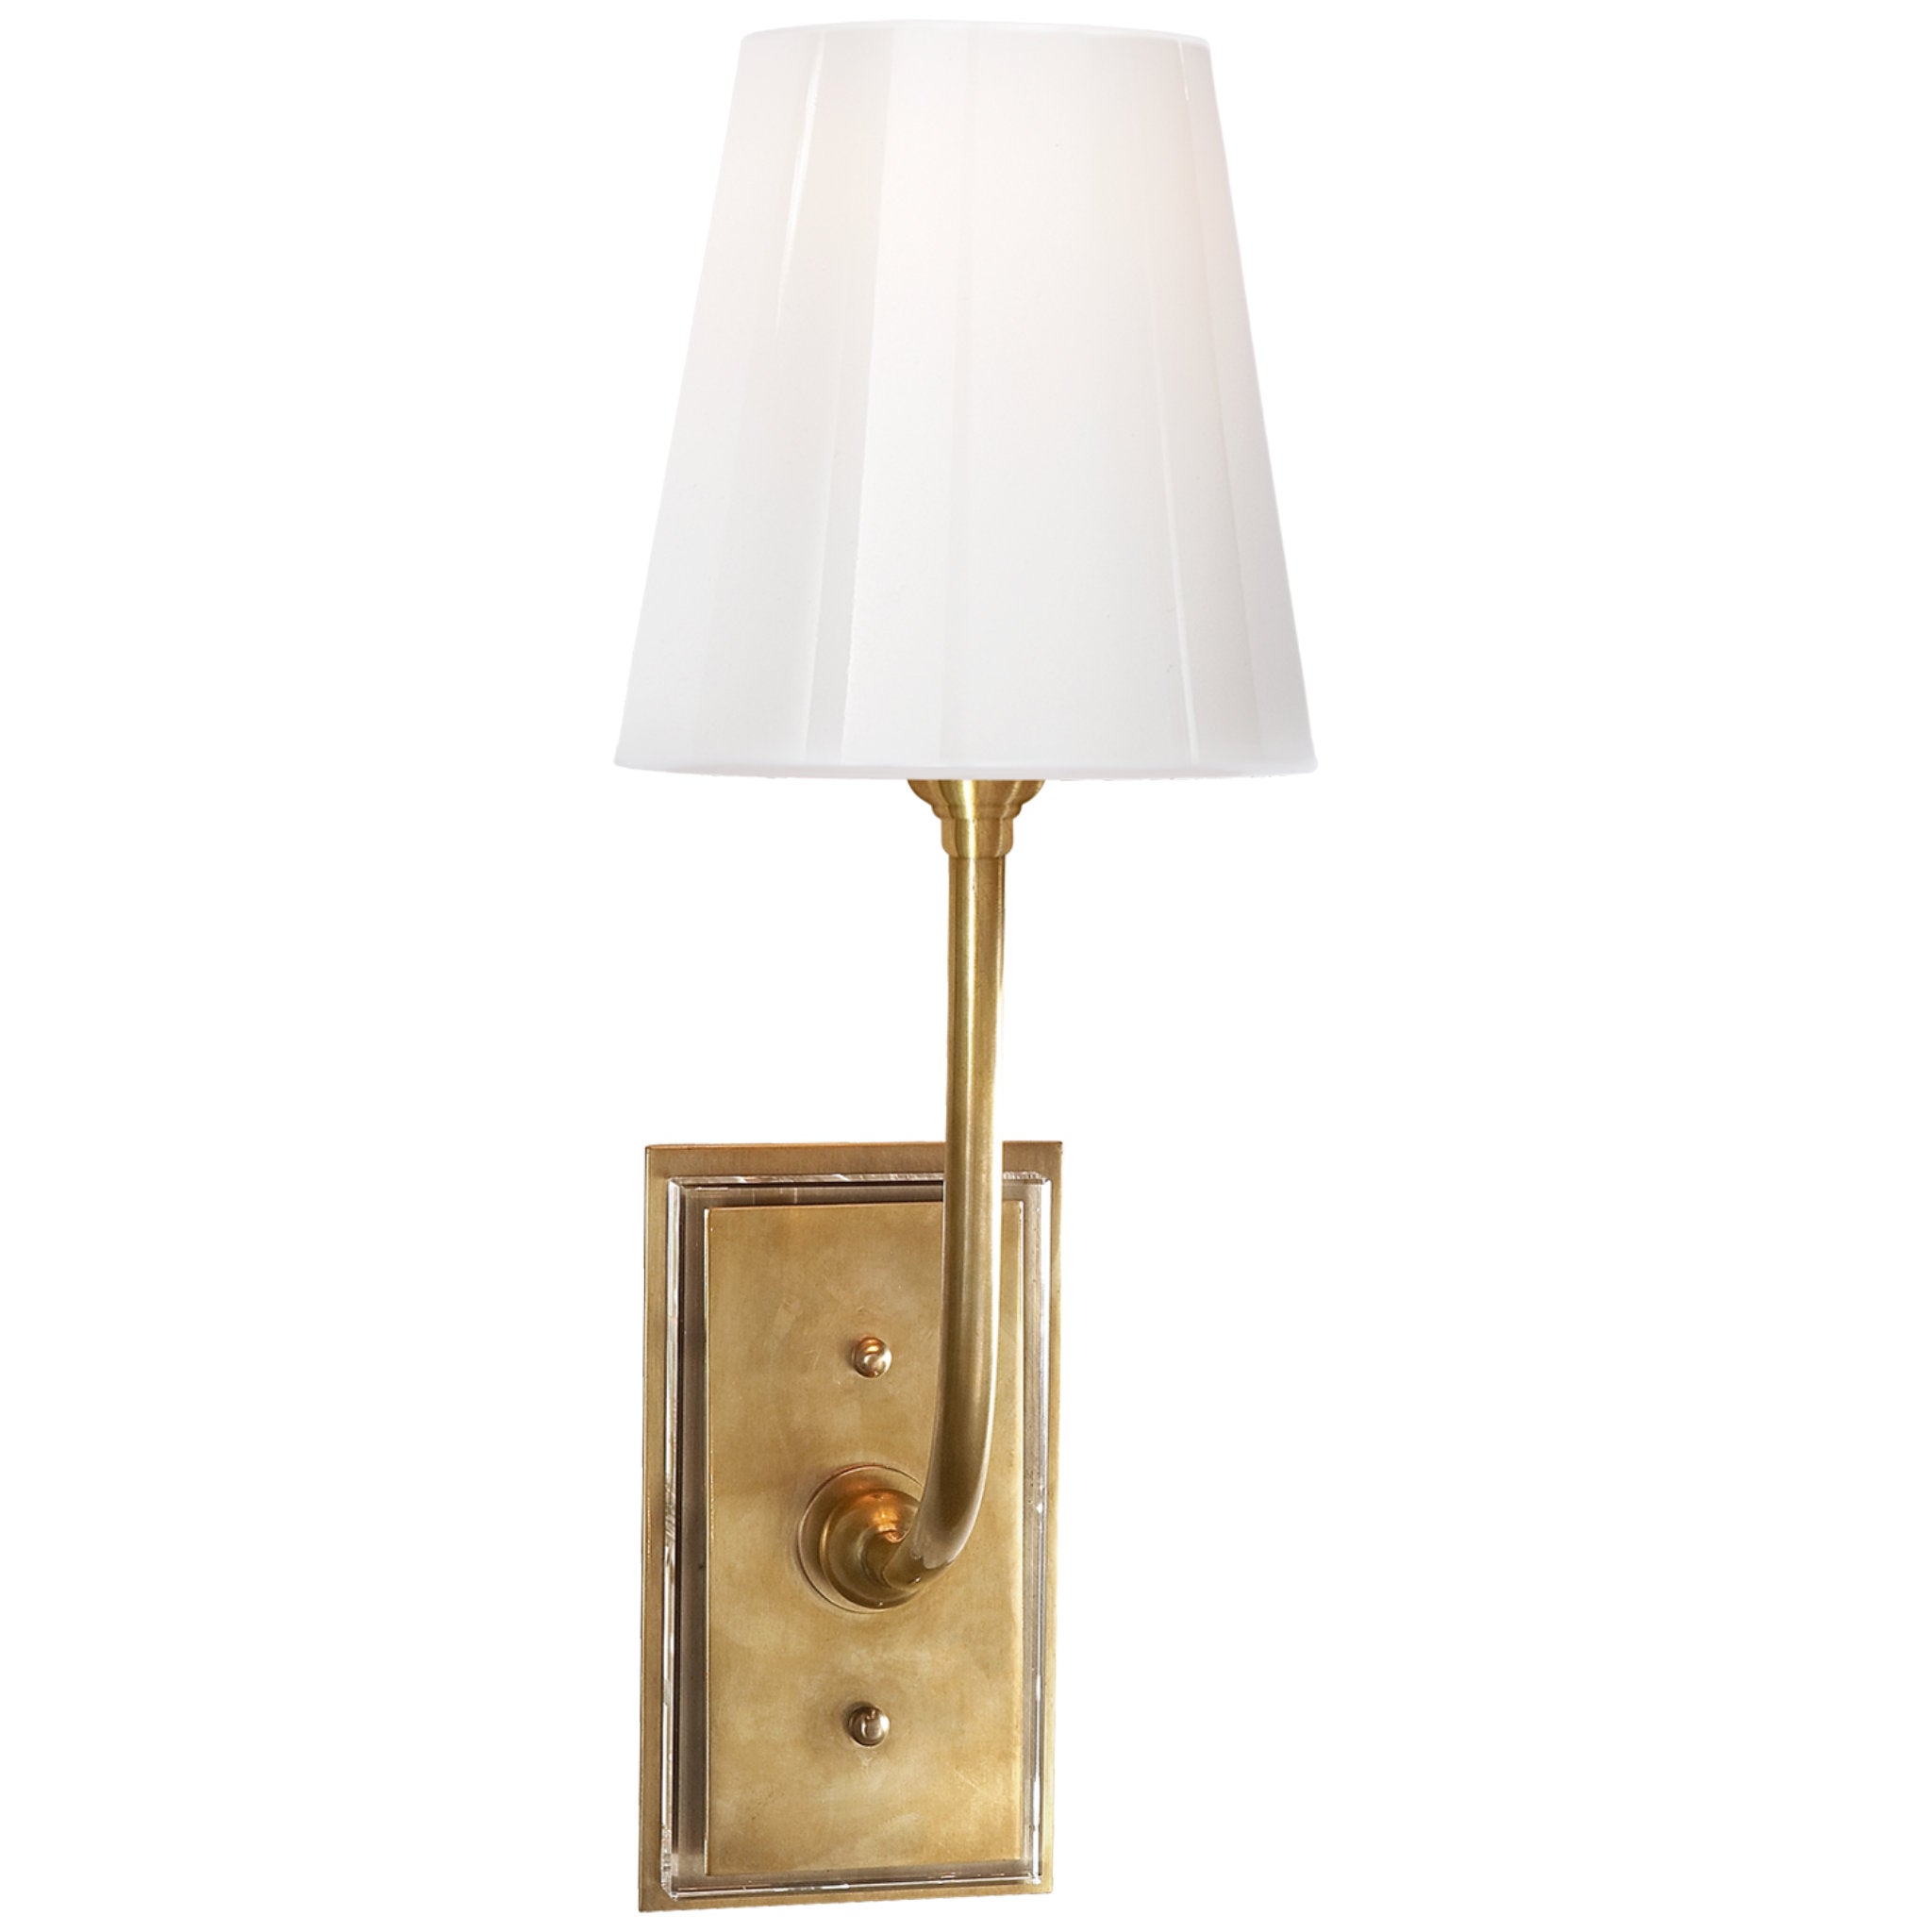 Thomas O'Brien Hulton Sconce in Hand-Rubbed Antique Brass with Crystal Backplate and White Glass Shade